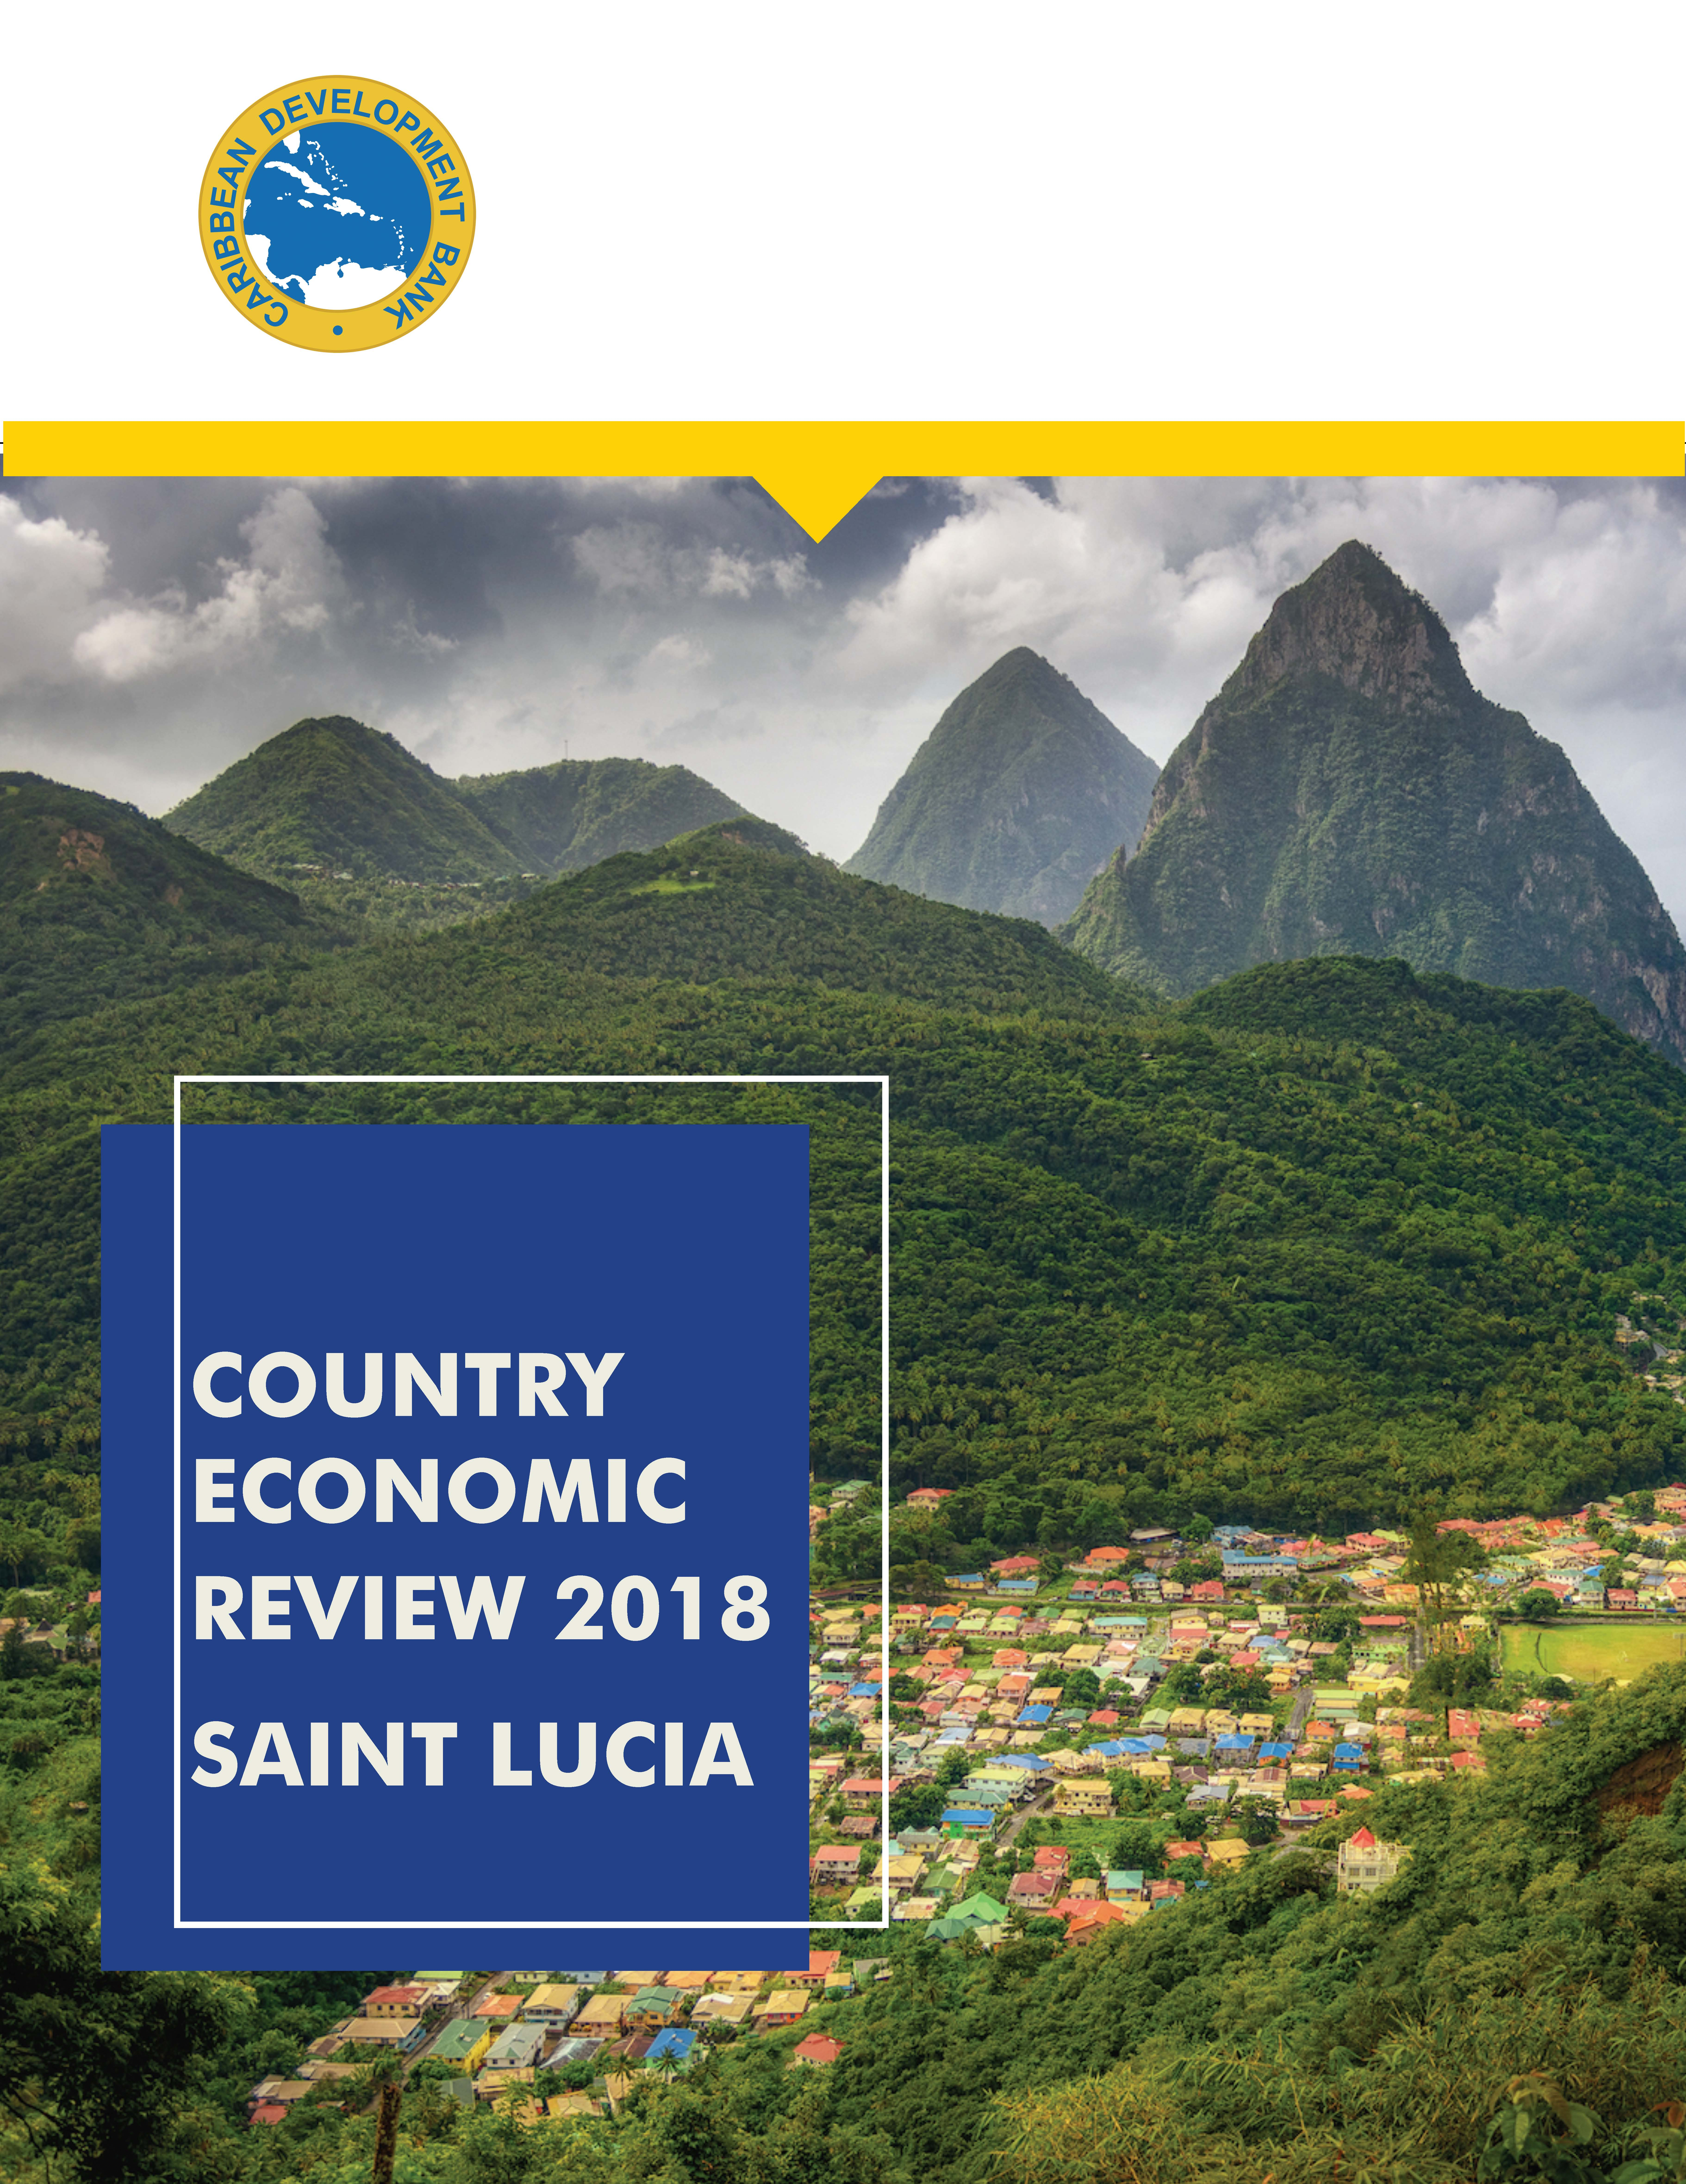 cover of 2018 Economic Review for Saint Lucia which features a image of the town Soufriere in Saint Lucia